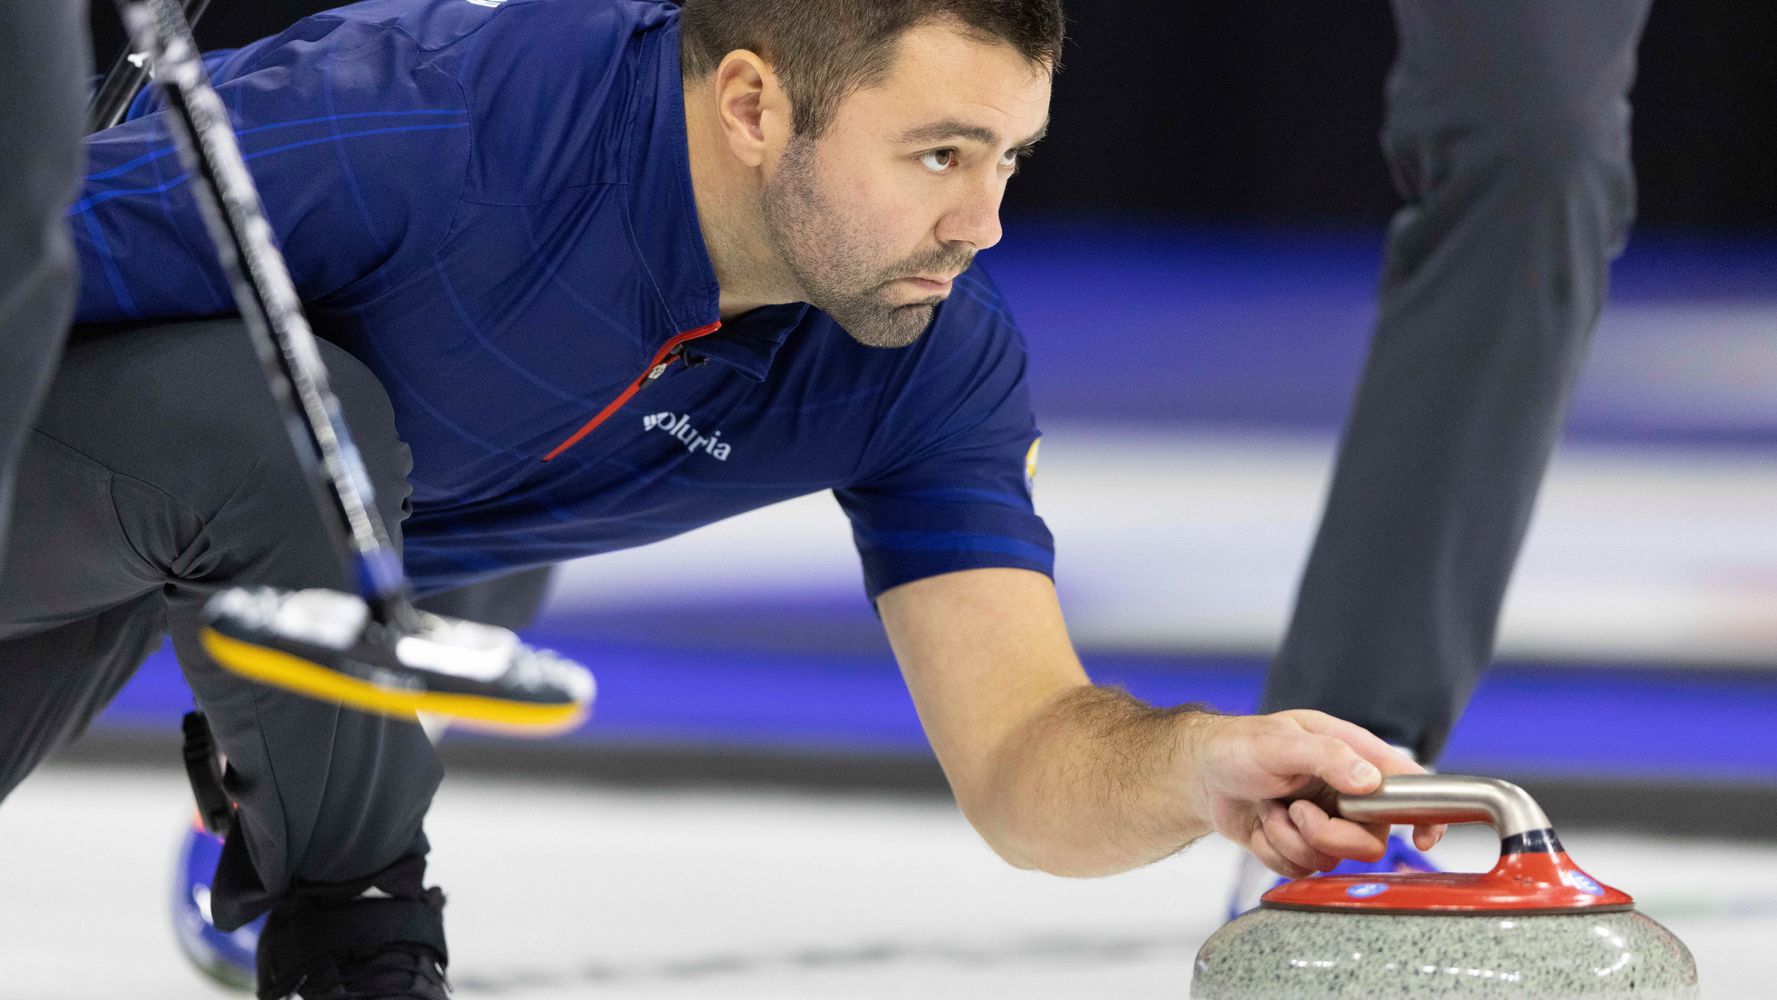 Sex Toy Sponsorship Was Too Racy For Curling Crowd: Promoter | HuffPost null